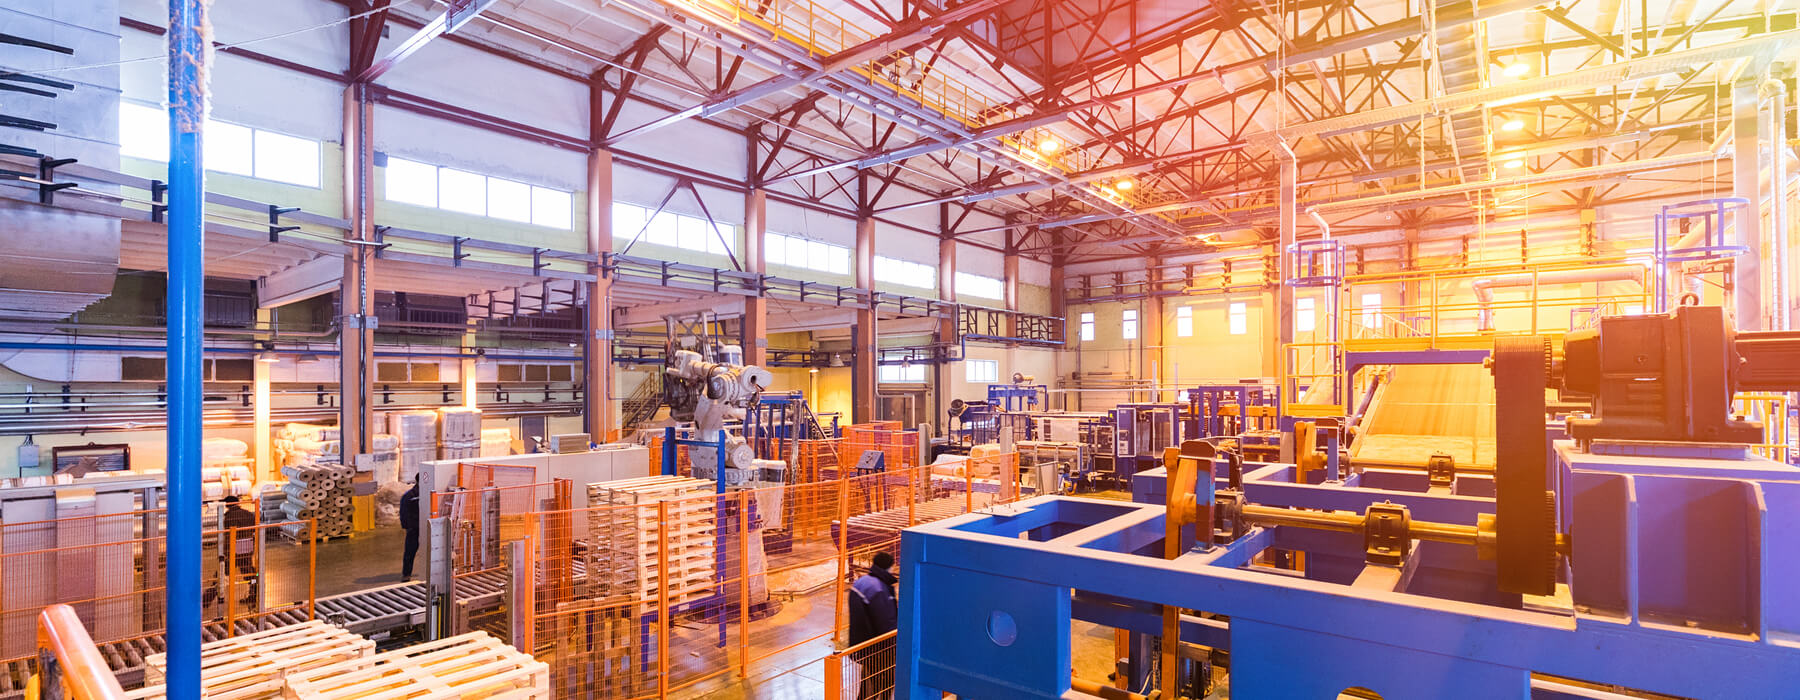 3 Ways In Which Automation Improves Warehouse Safety